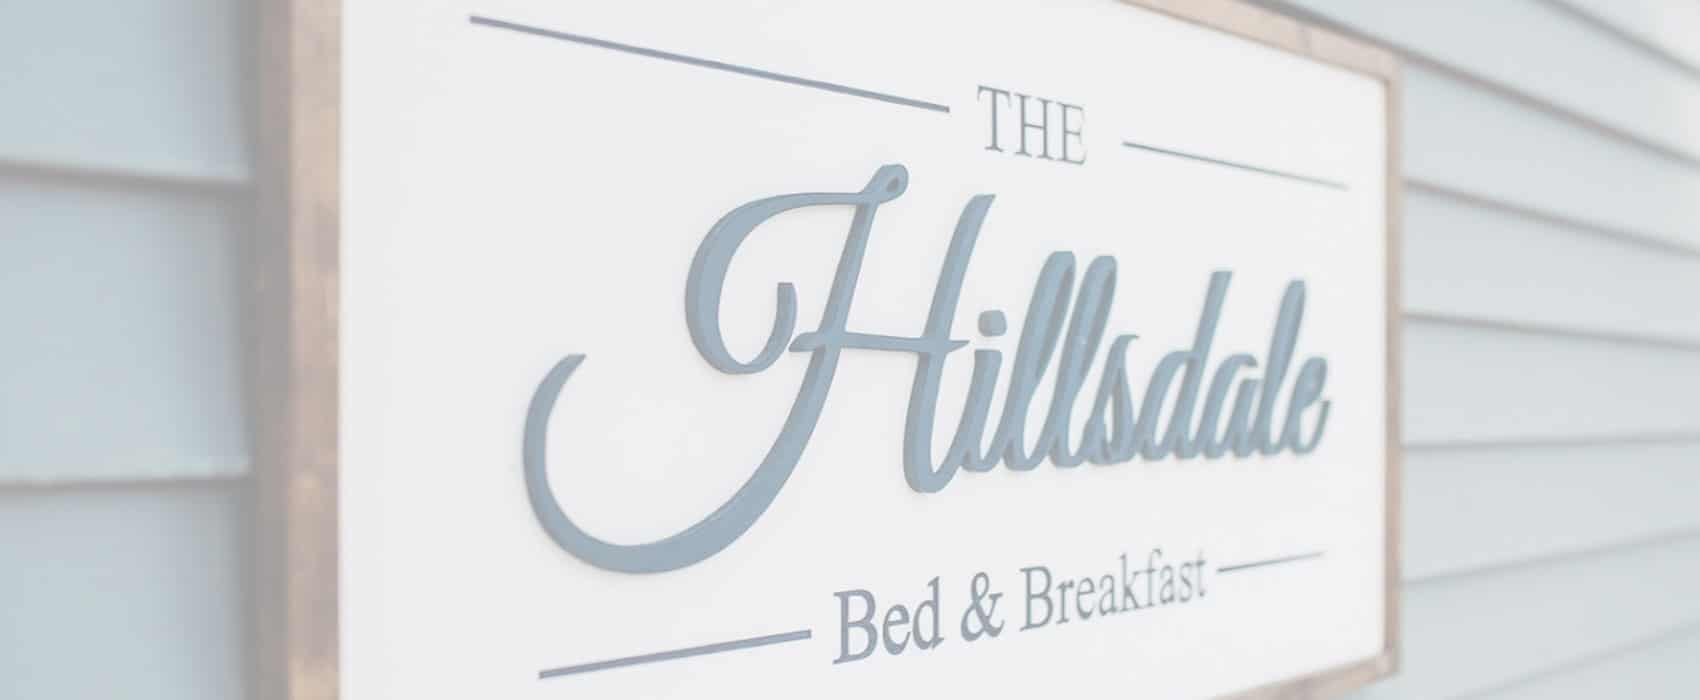 Hillsdale sign